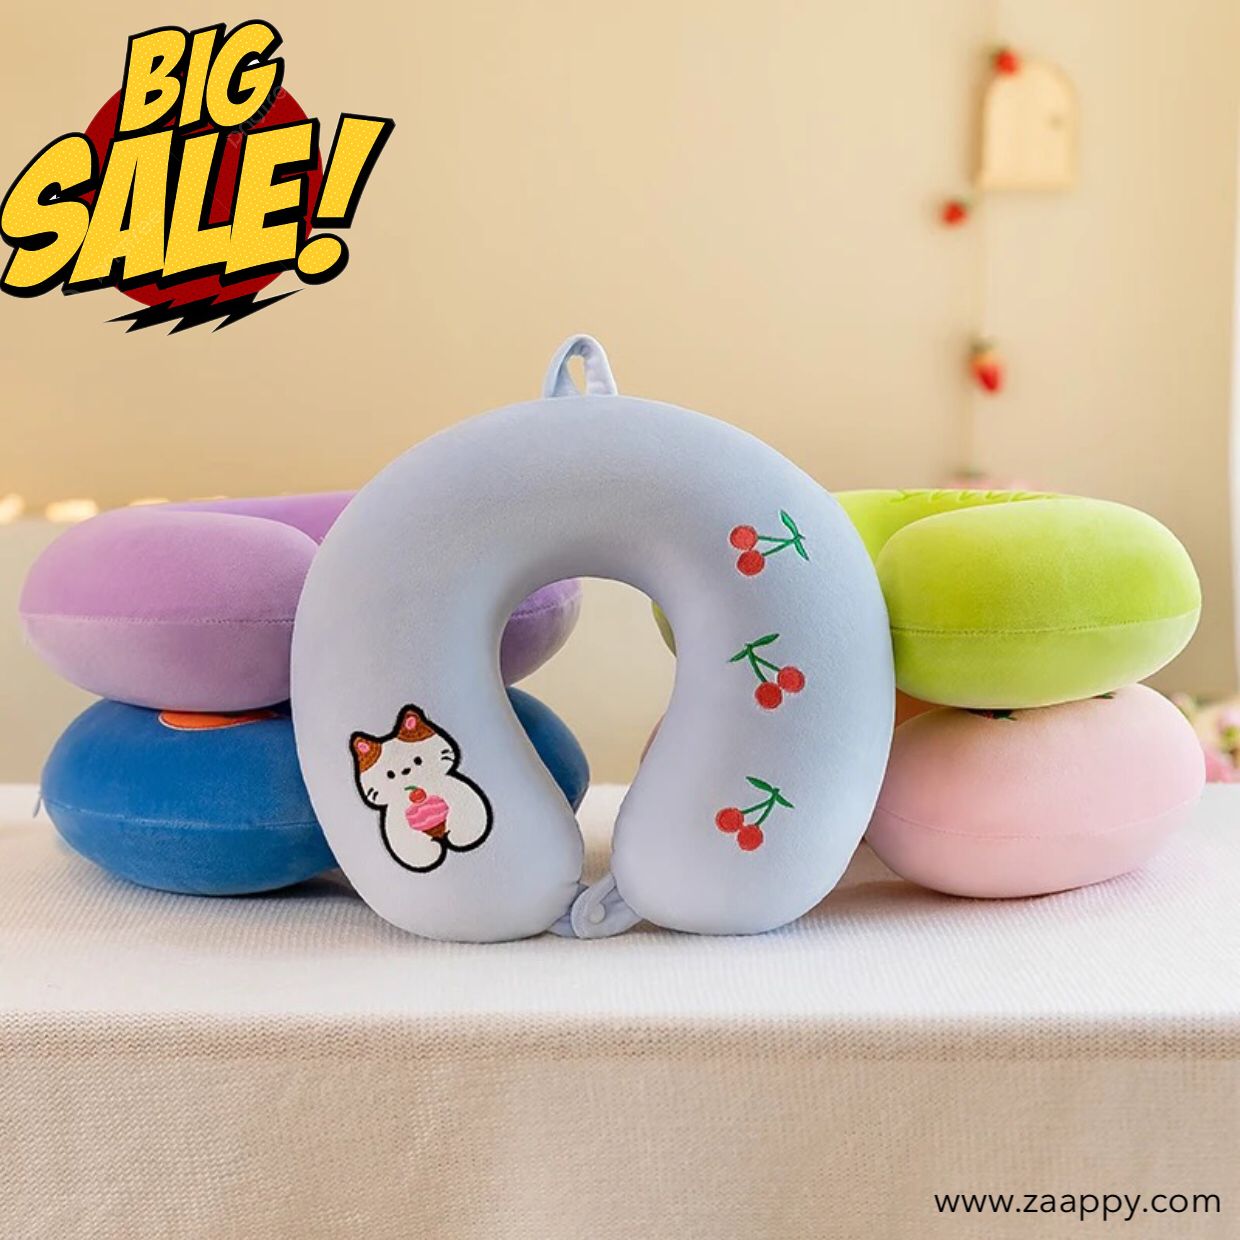 Soft Memory Form Neck Pillow and Sleeping Eye Mask For Travel Purpose | Cute Fruit Printed